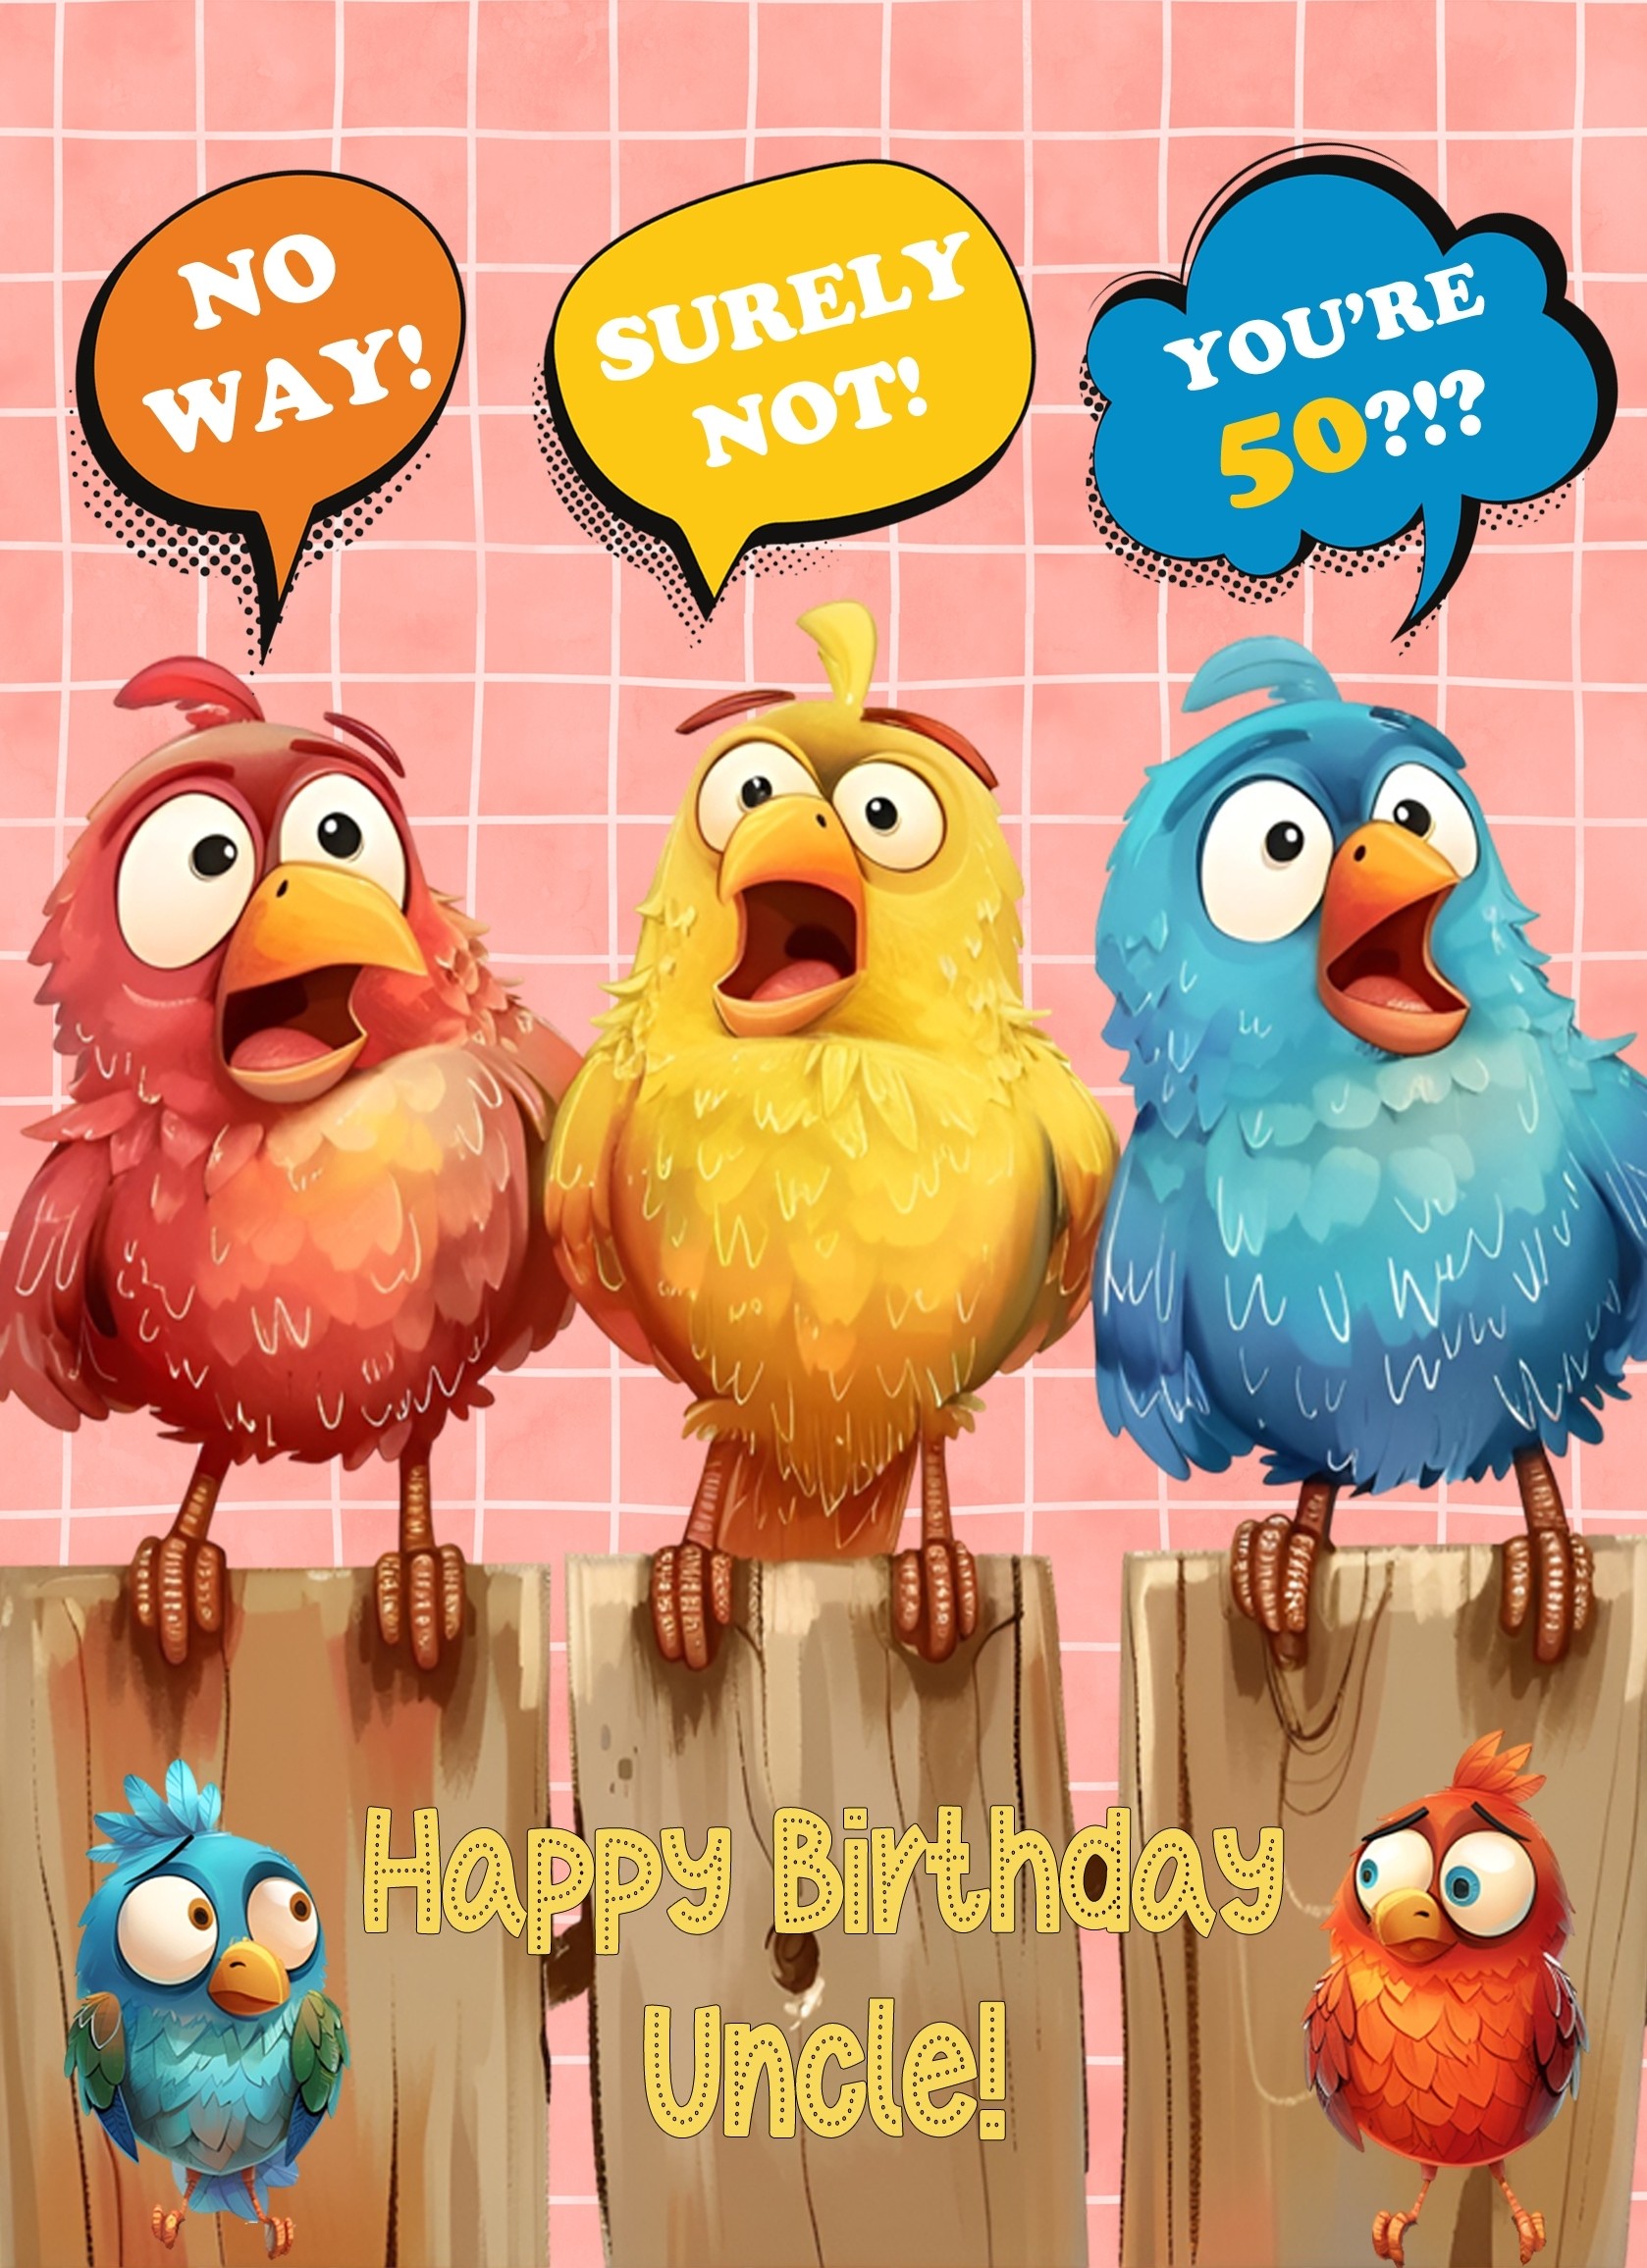 Uncle 50th Birthday Card (Funny Birds Surprised)